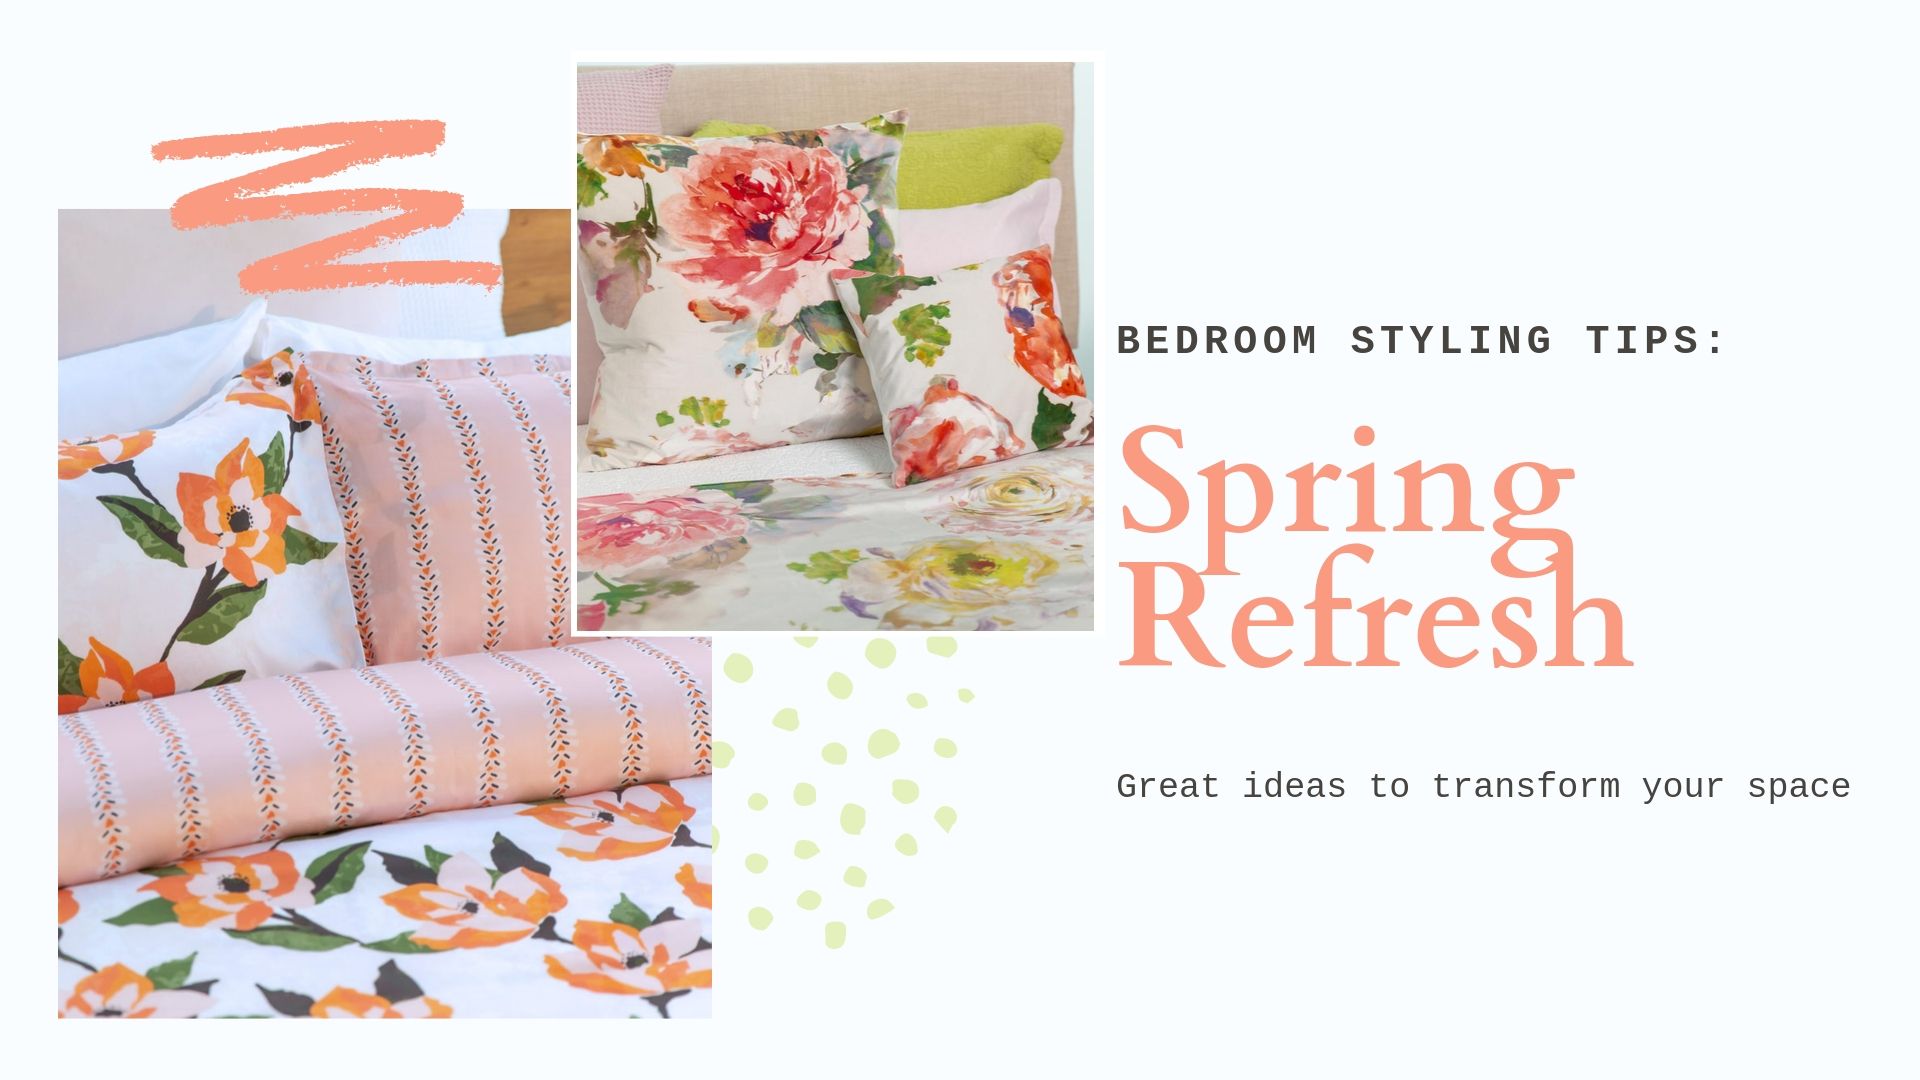 Bedroom Styling tips: Spring Refresh